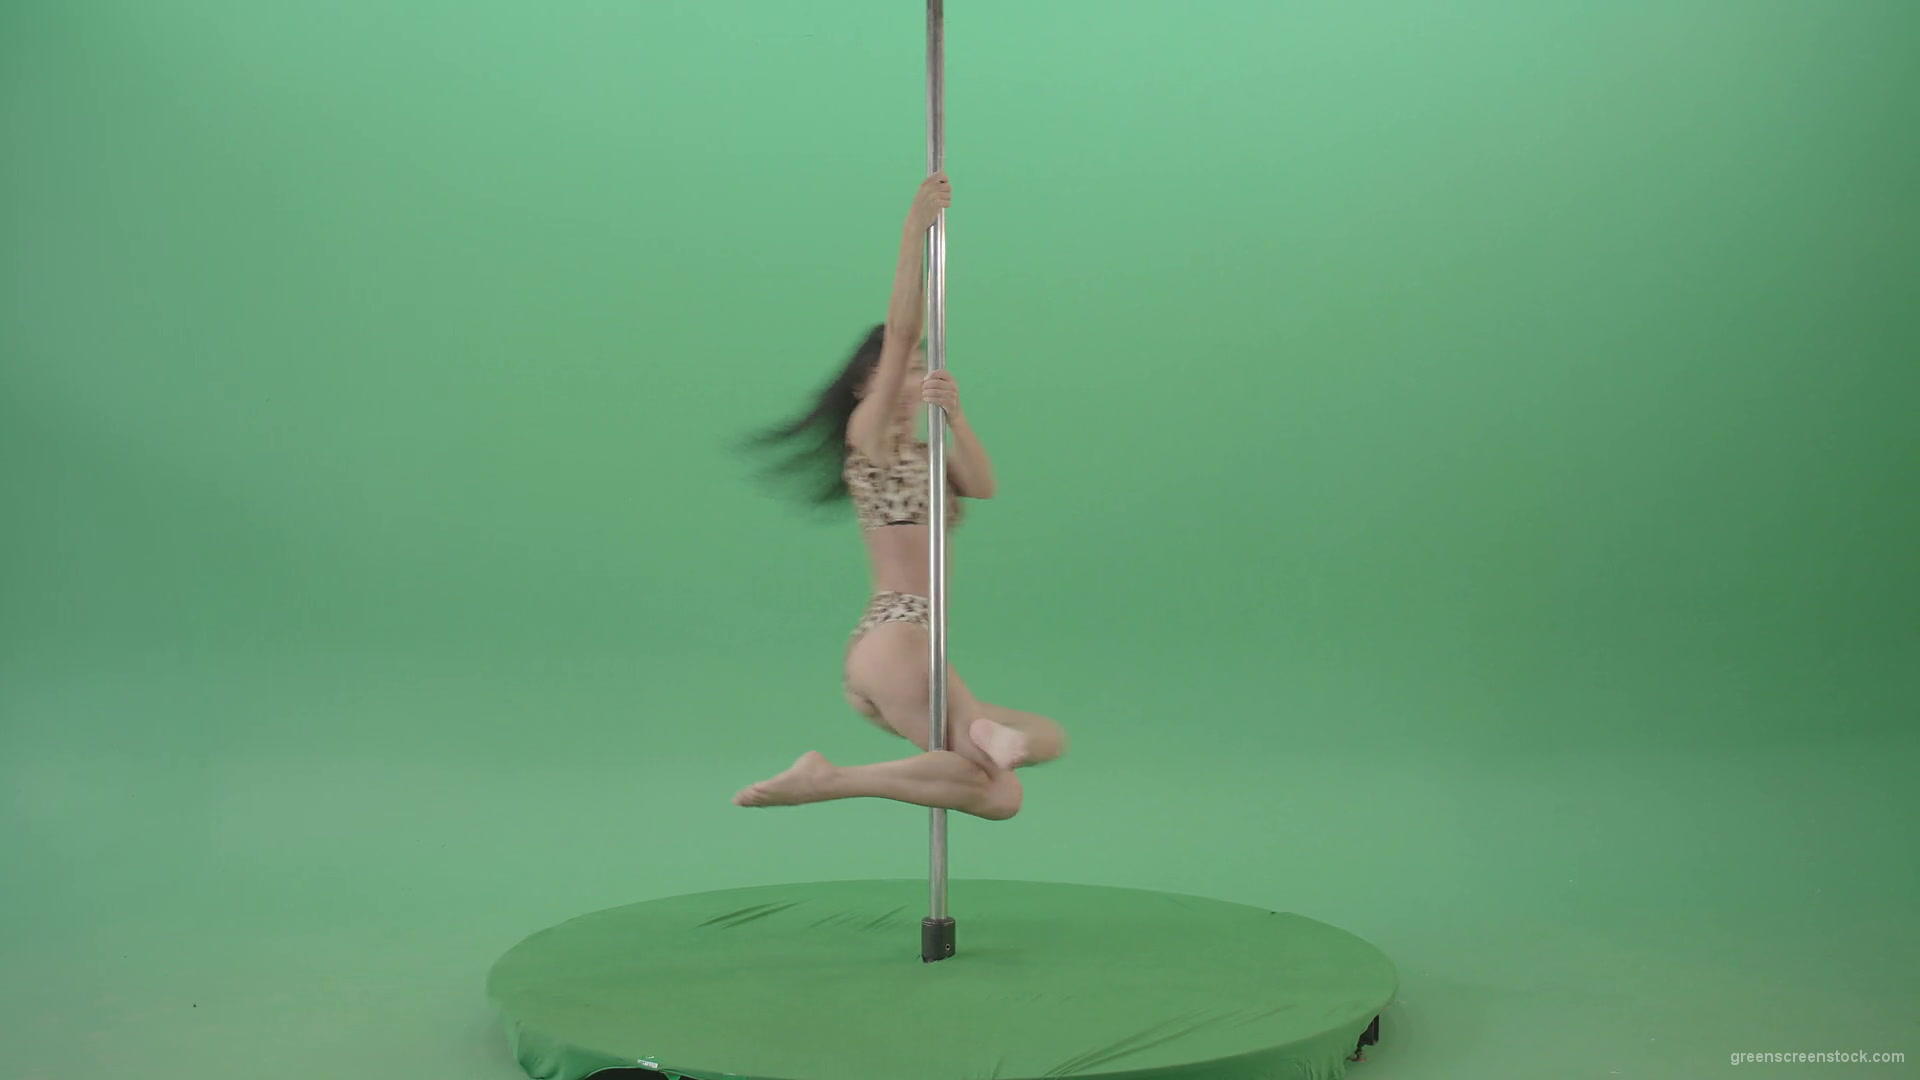 Glamor-girl-in-leopard-underwear-dancing-on-pilon-Pole-dance-and-spinning-isolated-on-Green-Screen-Video-Footage-1920_008 Green Screen Stock